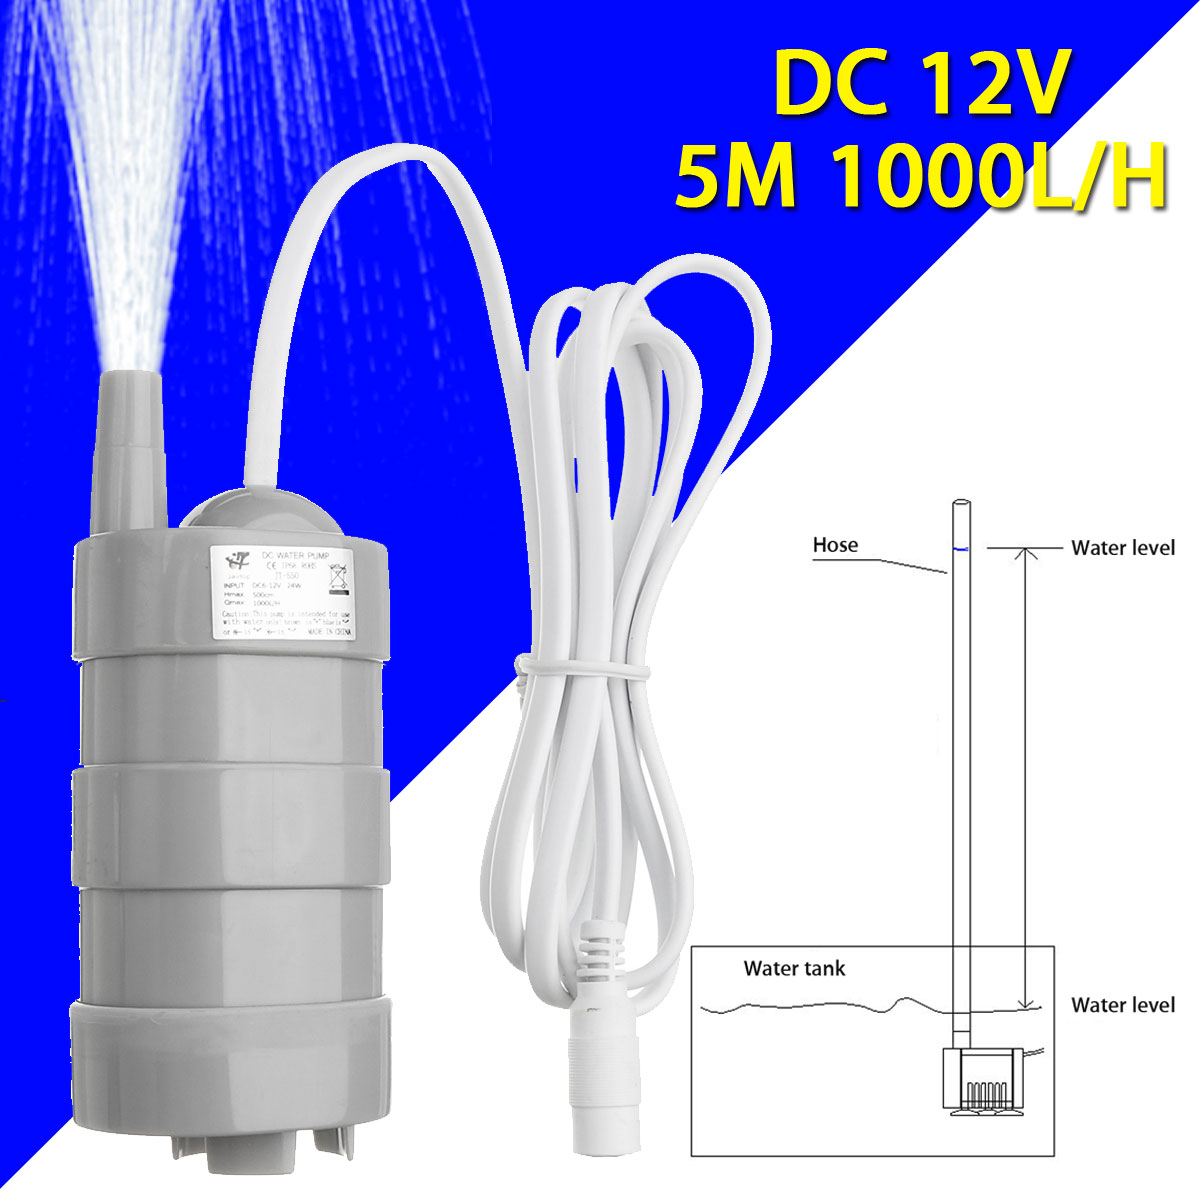 DC-12V-Pump-Solar-Brushless-Magnetic-Submersible-Water-Pump-5M-1000LH-Fish-Pond-Garden-Boat-1302228-2